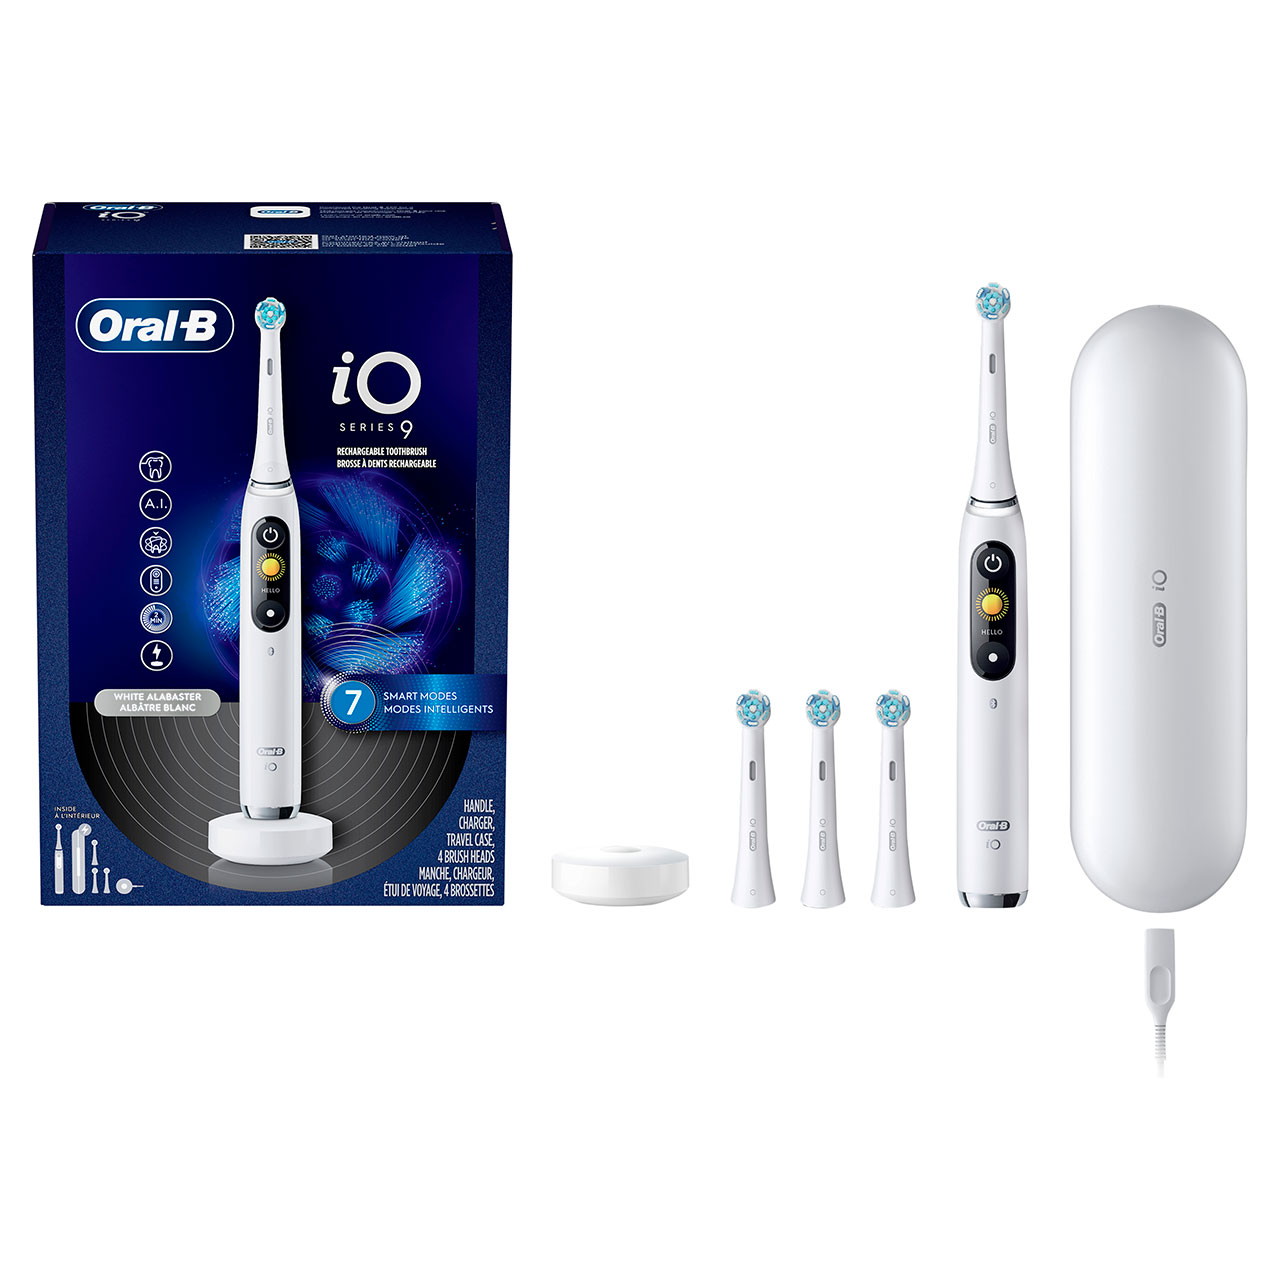 iO Series 9 Rechargeable Electric Toothbrush, White Alabaster